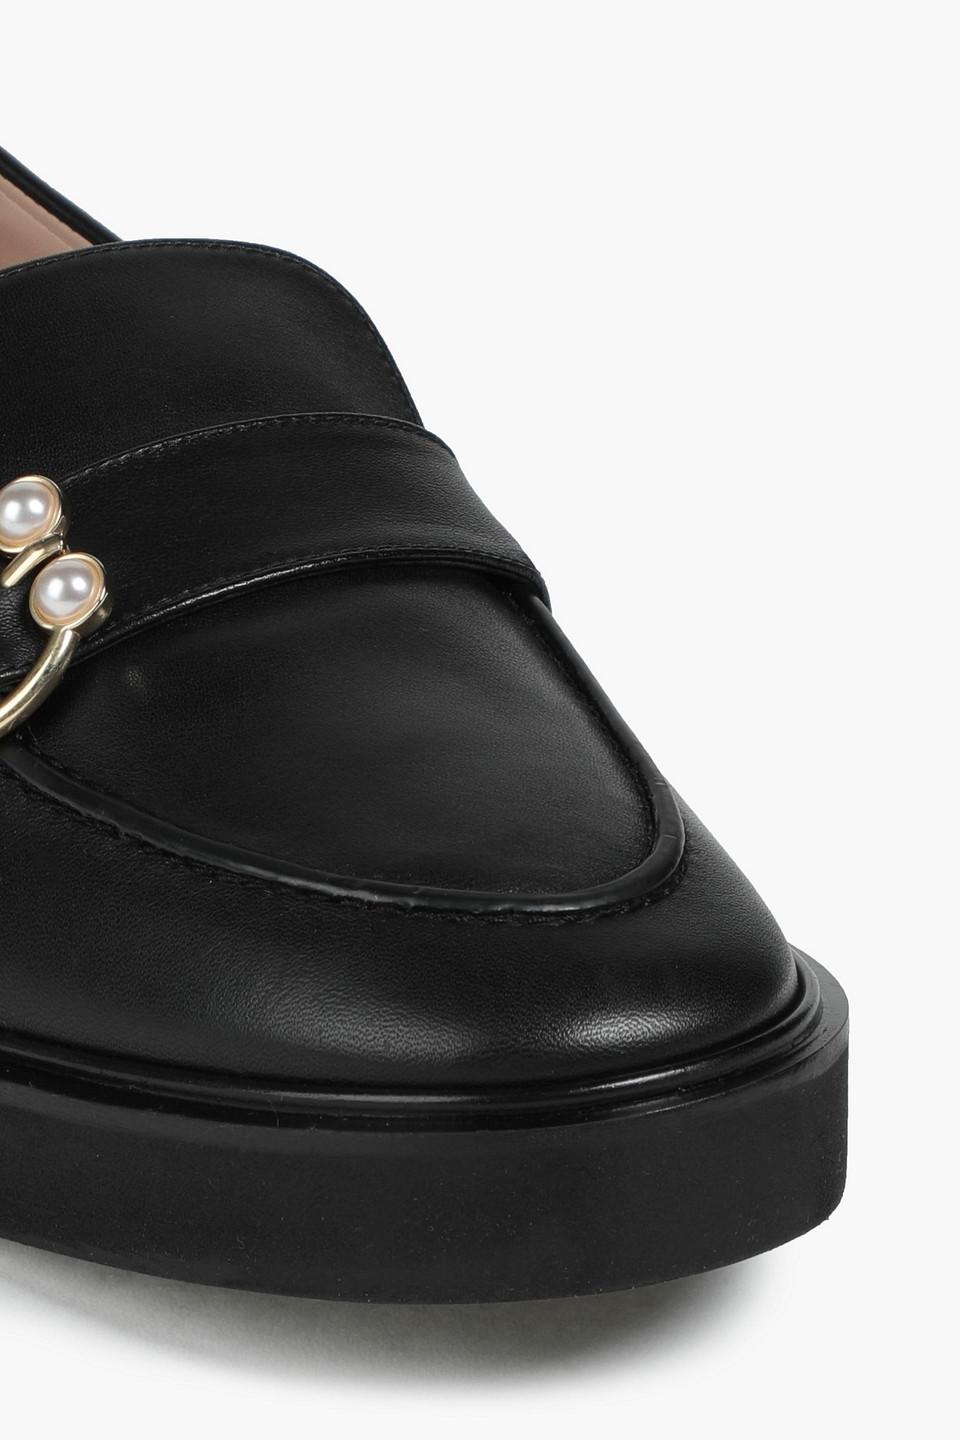 Stuart Weitzman Embellished Leather Loafers in Black | Lyst